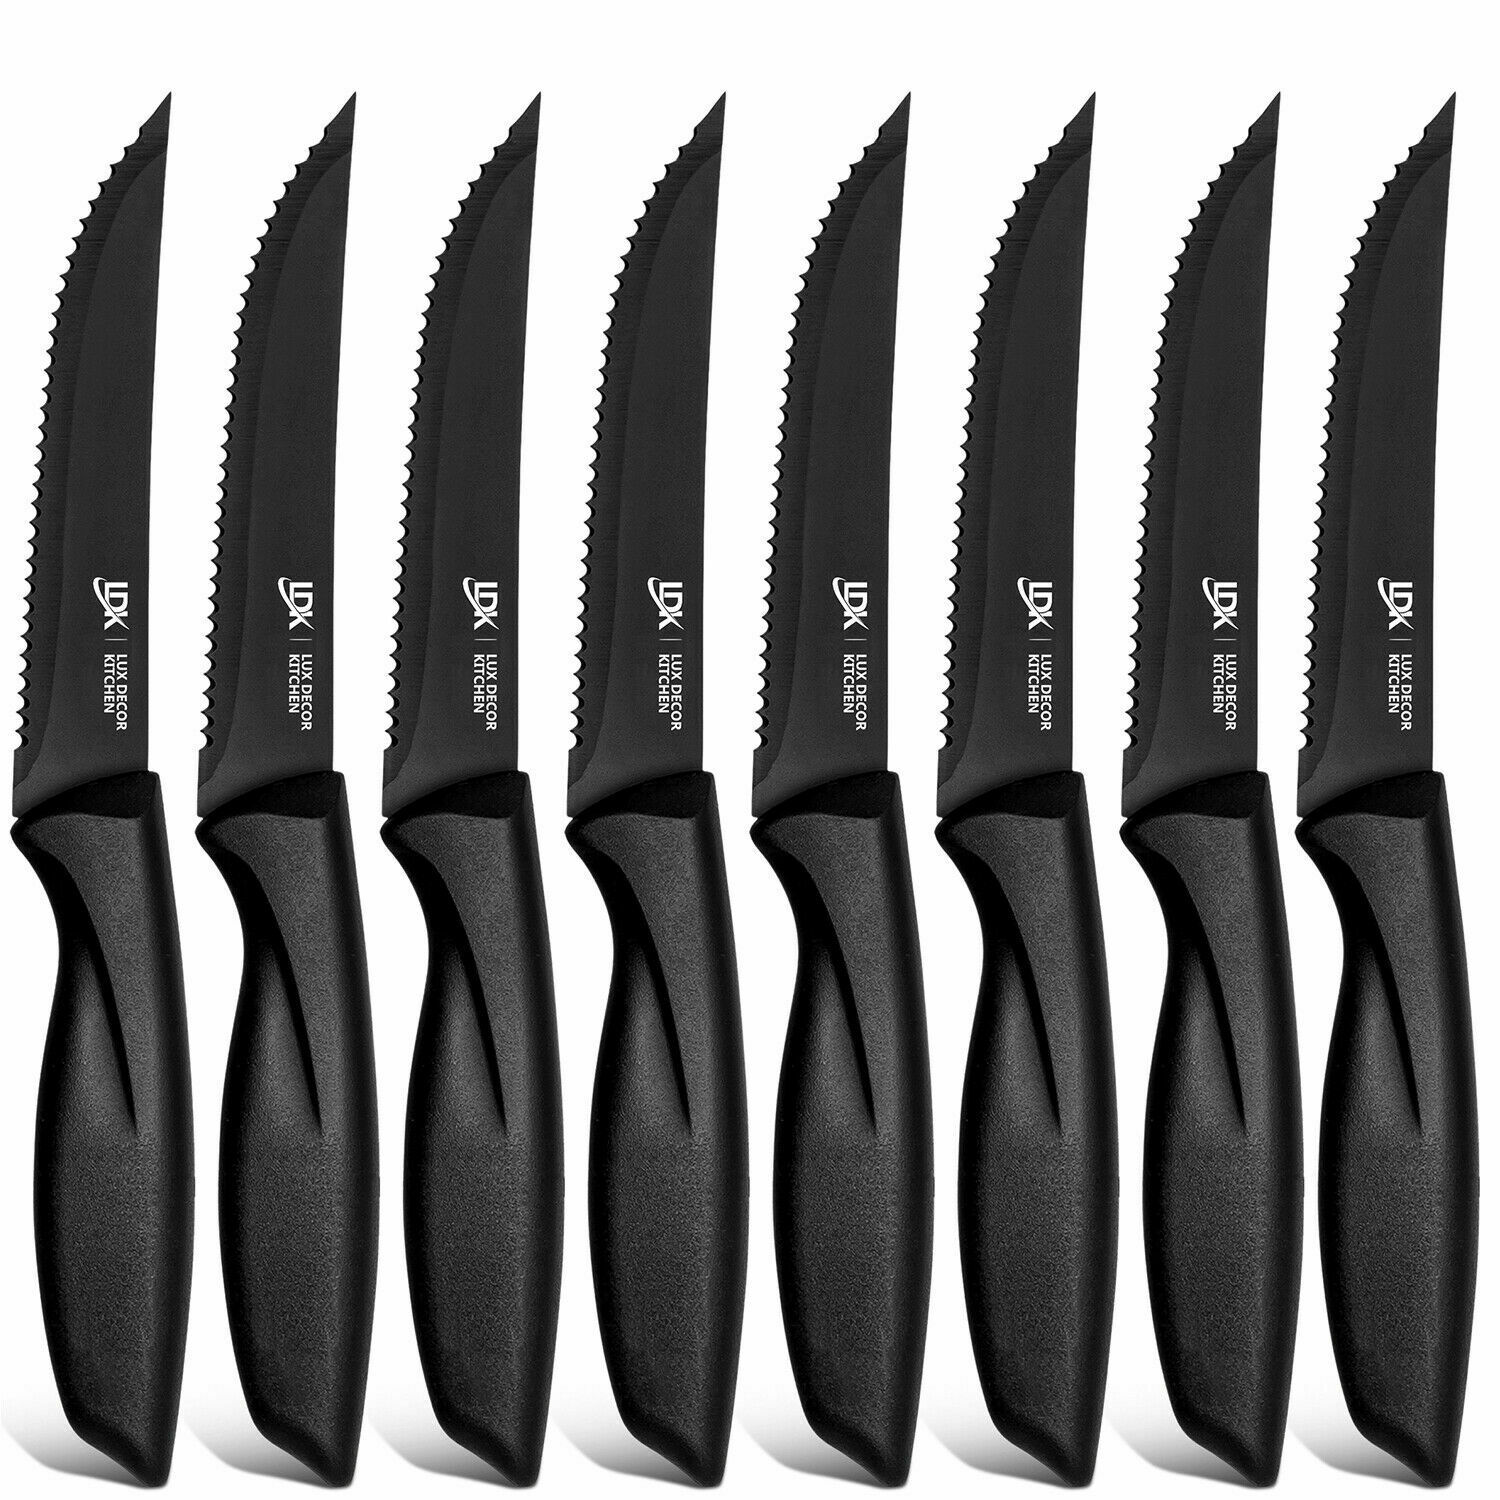 8 Piece Stainless Knife Set Professional Serrated Steak Knives Kitchen Tools USA